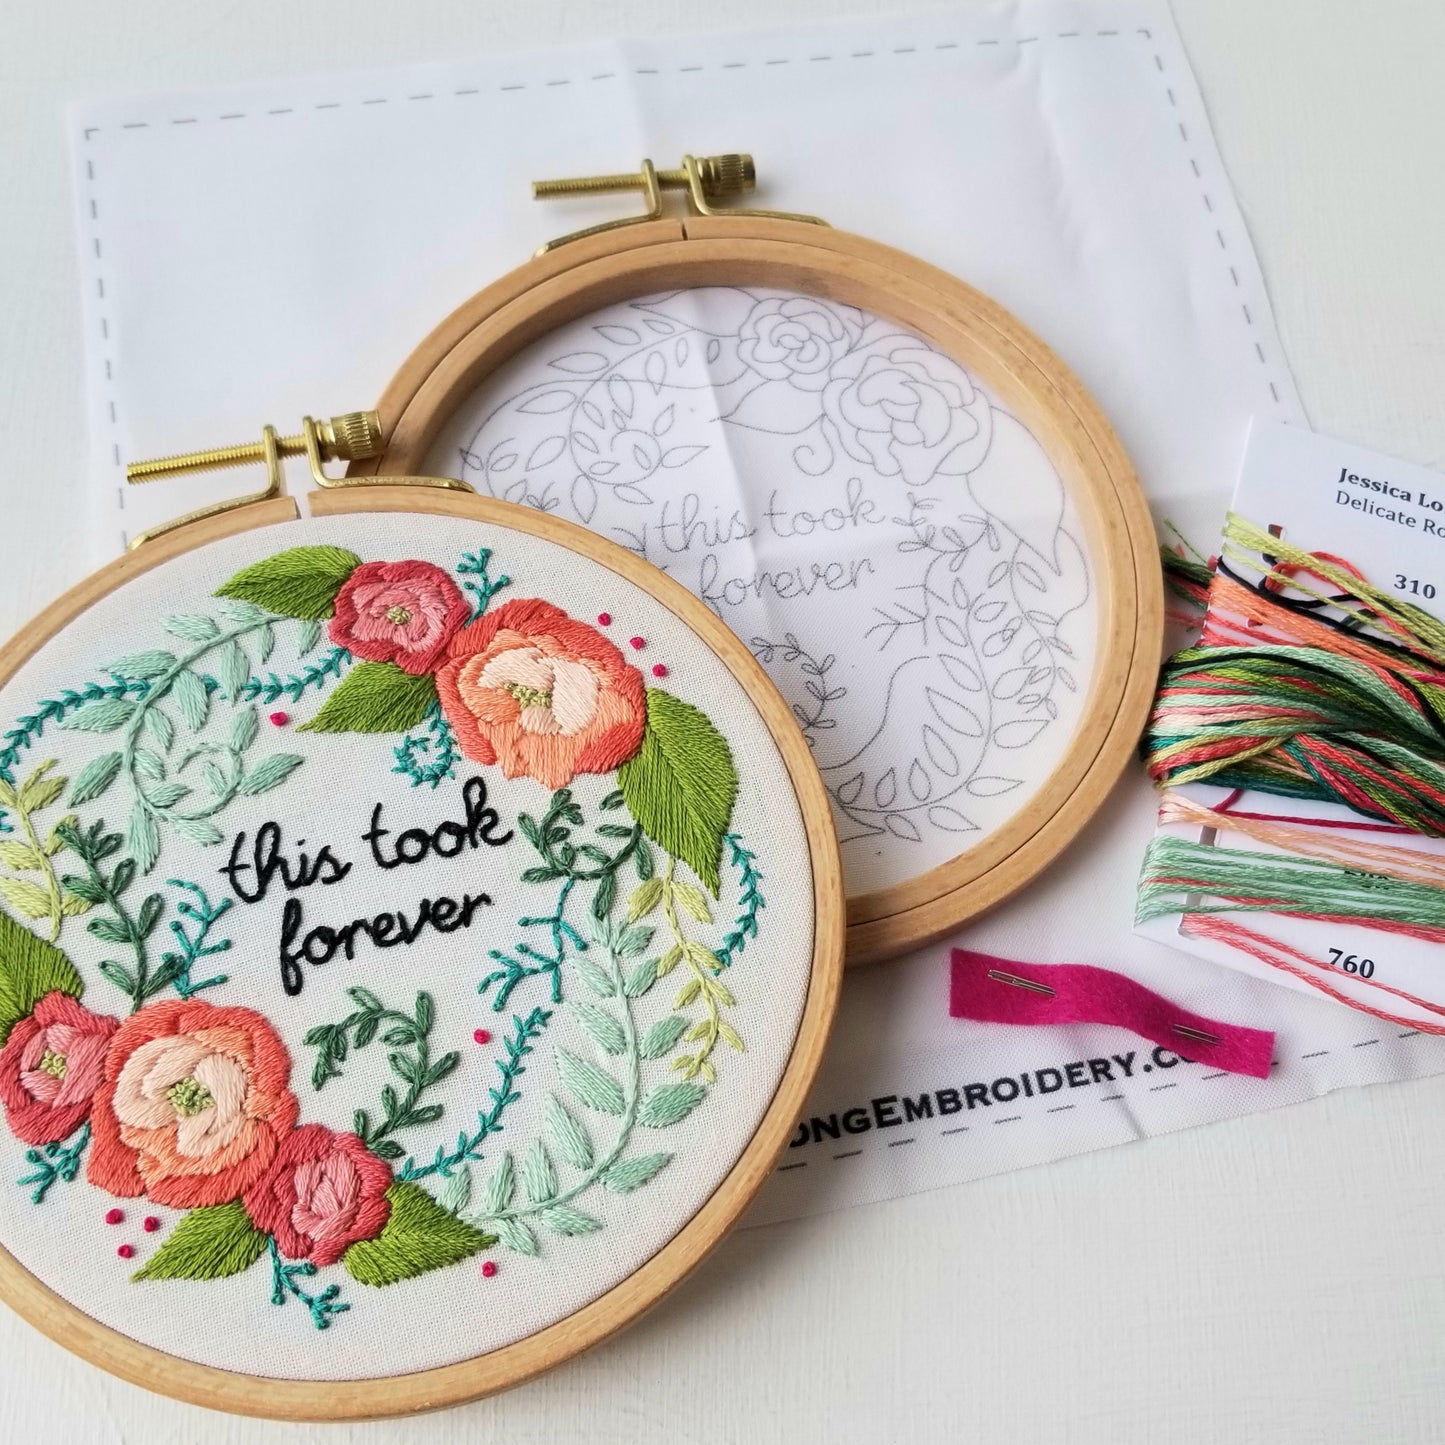 "This Took Forever" Embroidery Kit